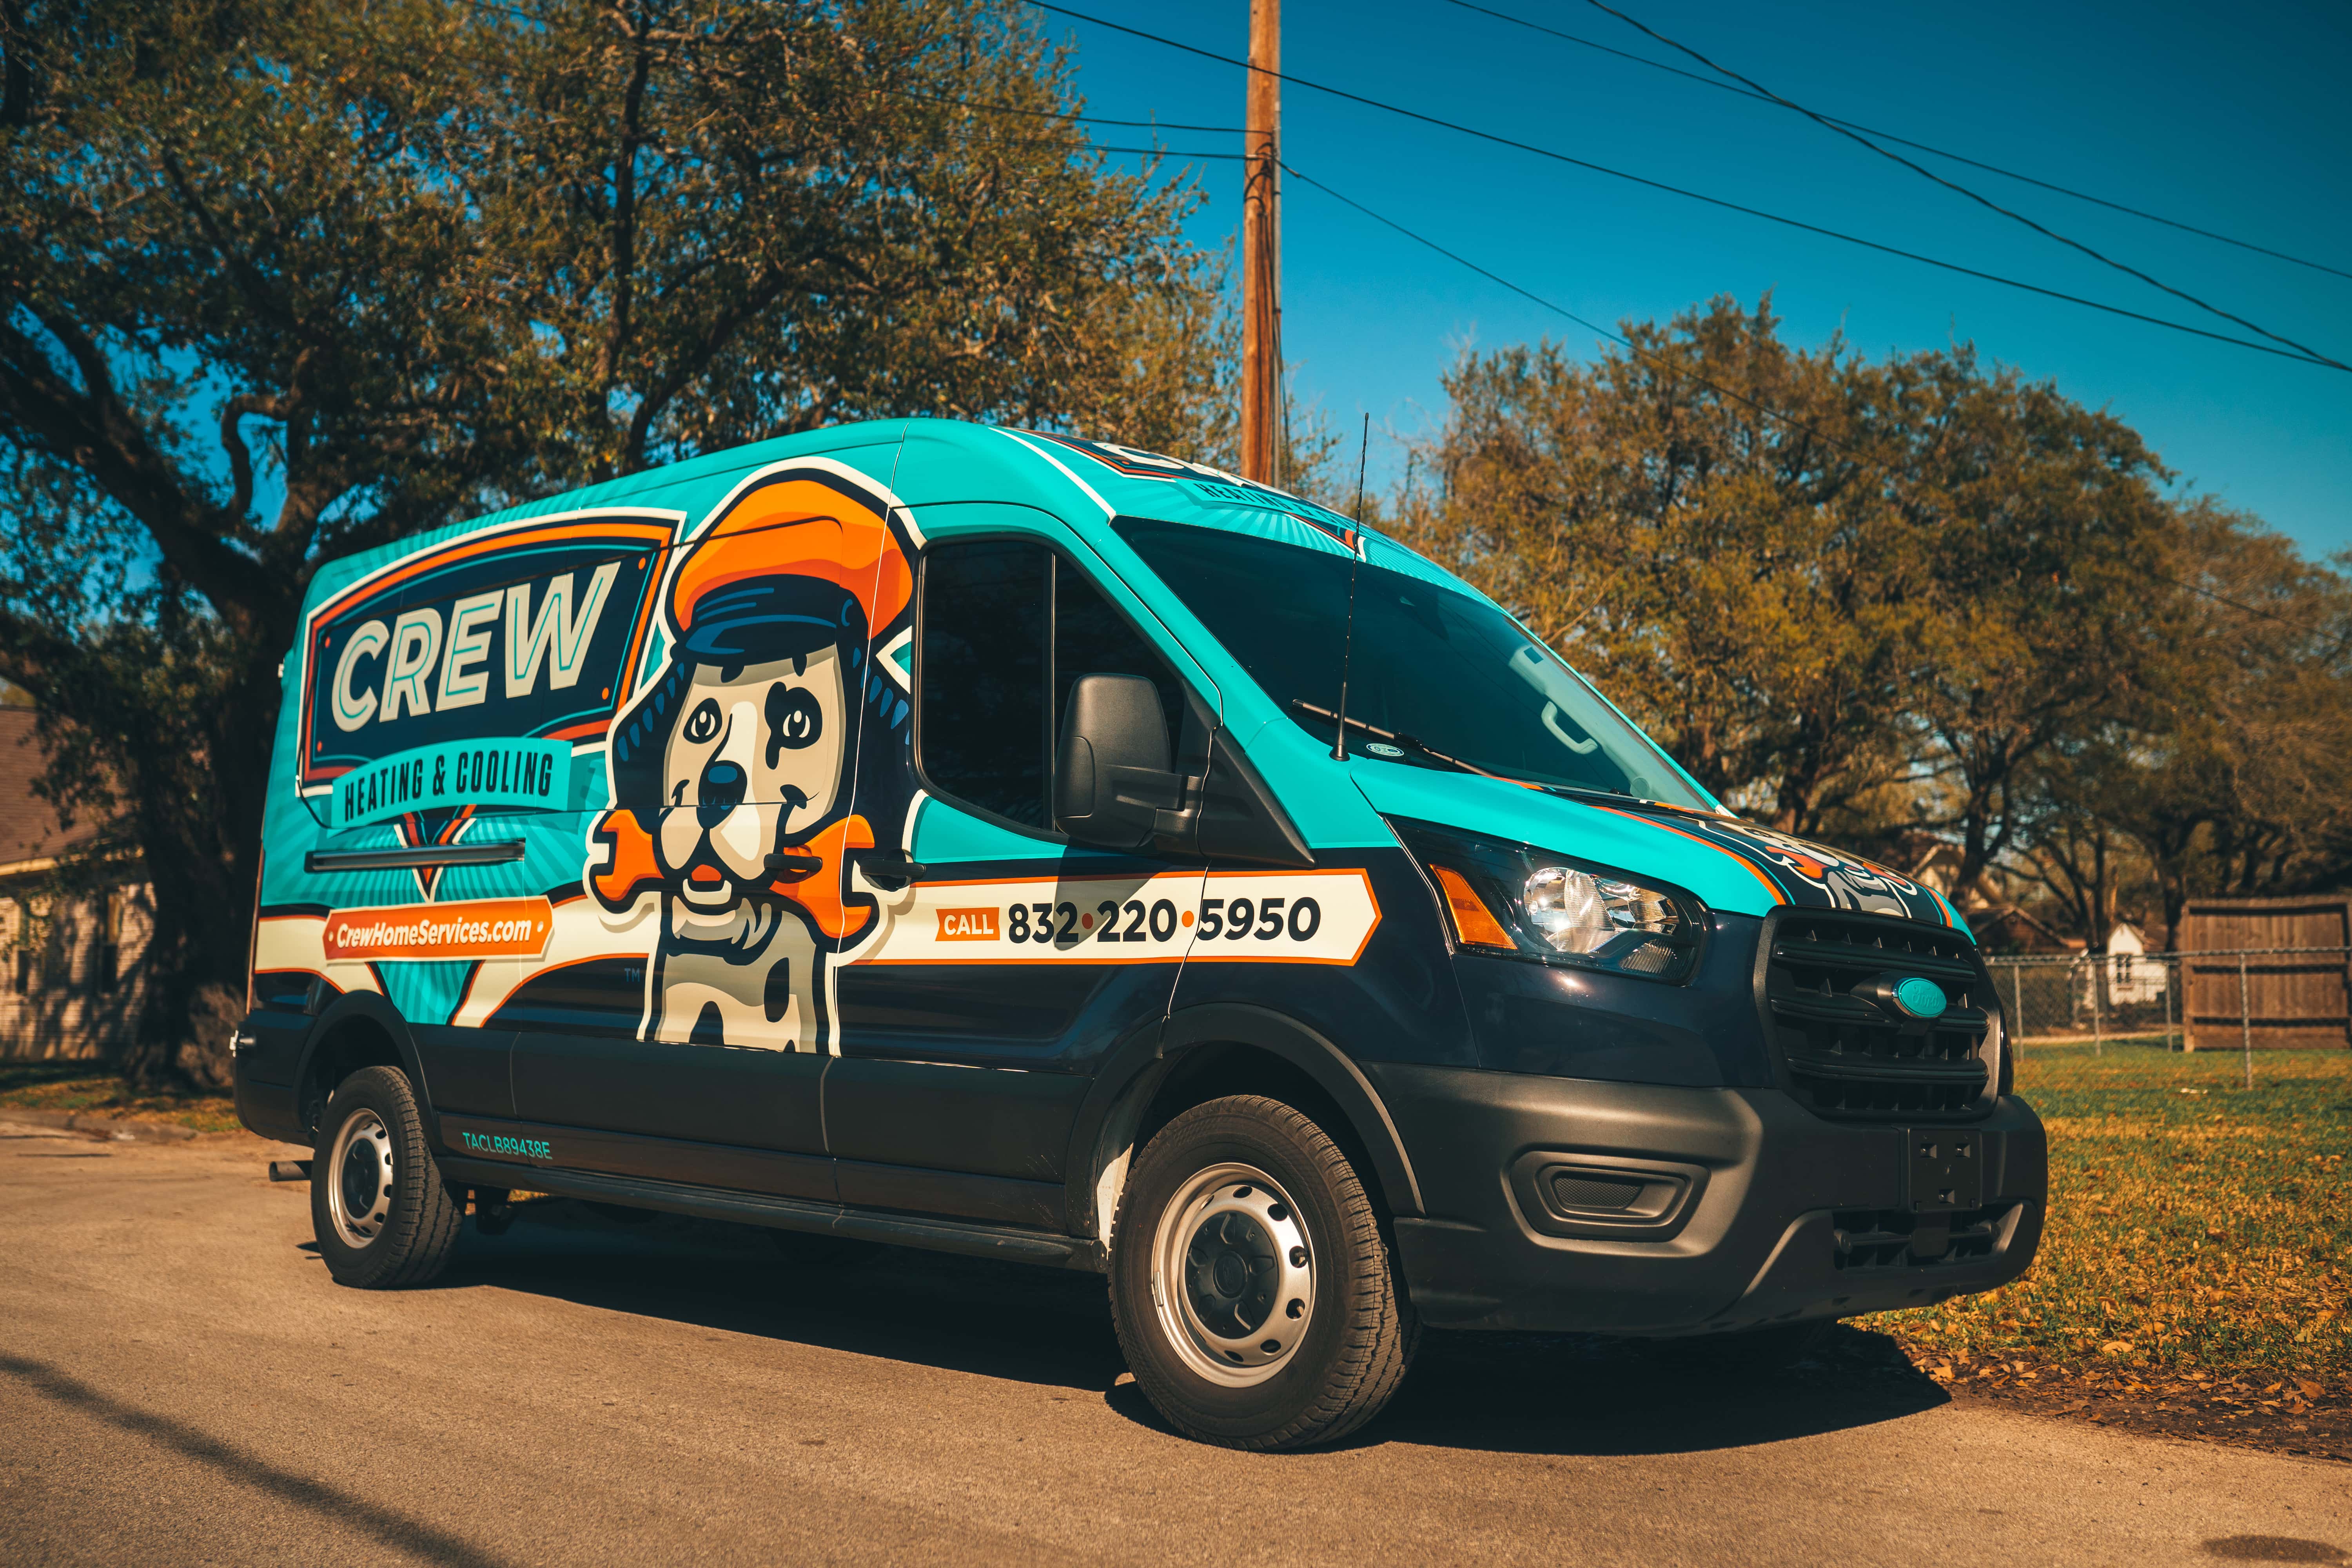 Crew Heating & Cooling - Humble, TX, US, heating contractor